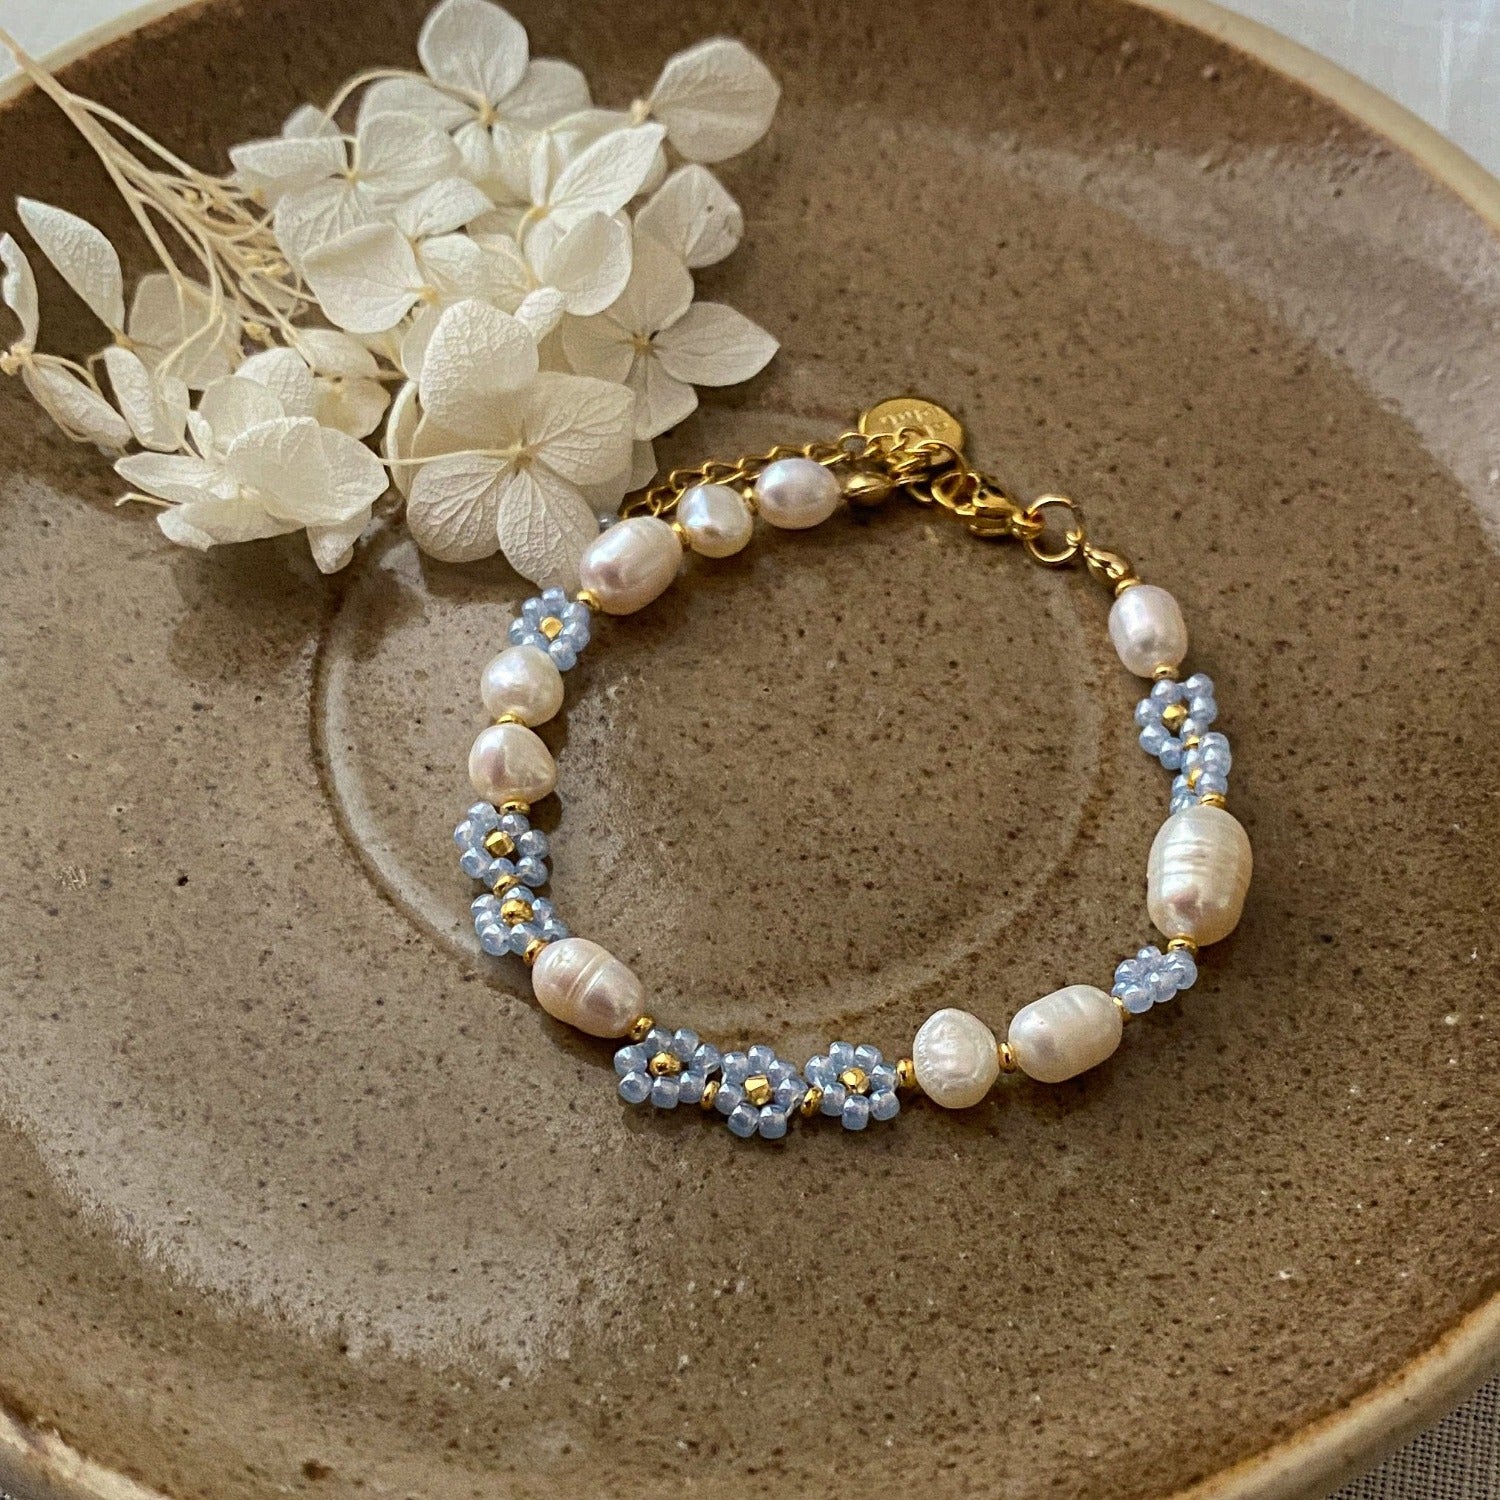 Pearl bracelet with blue flowers and golden clasps